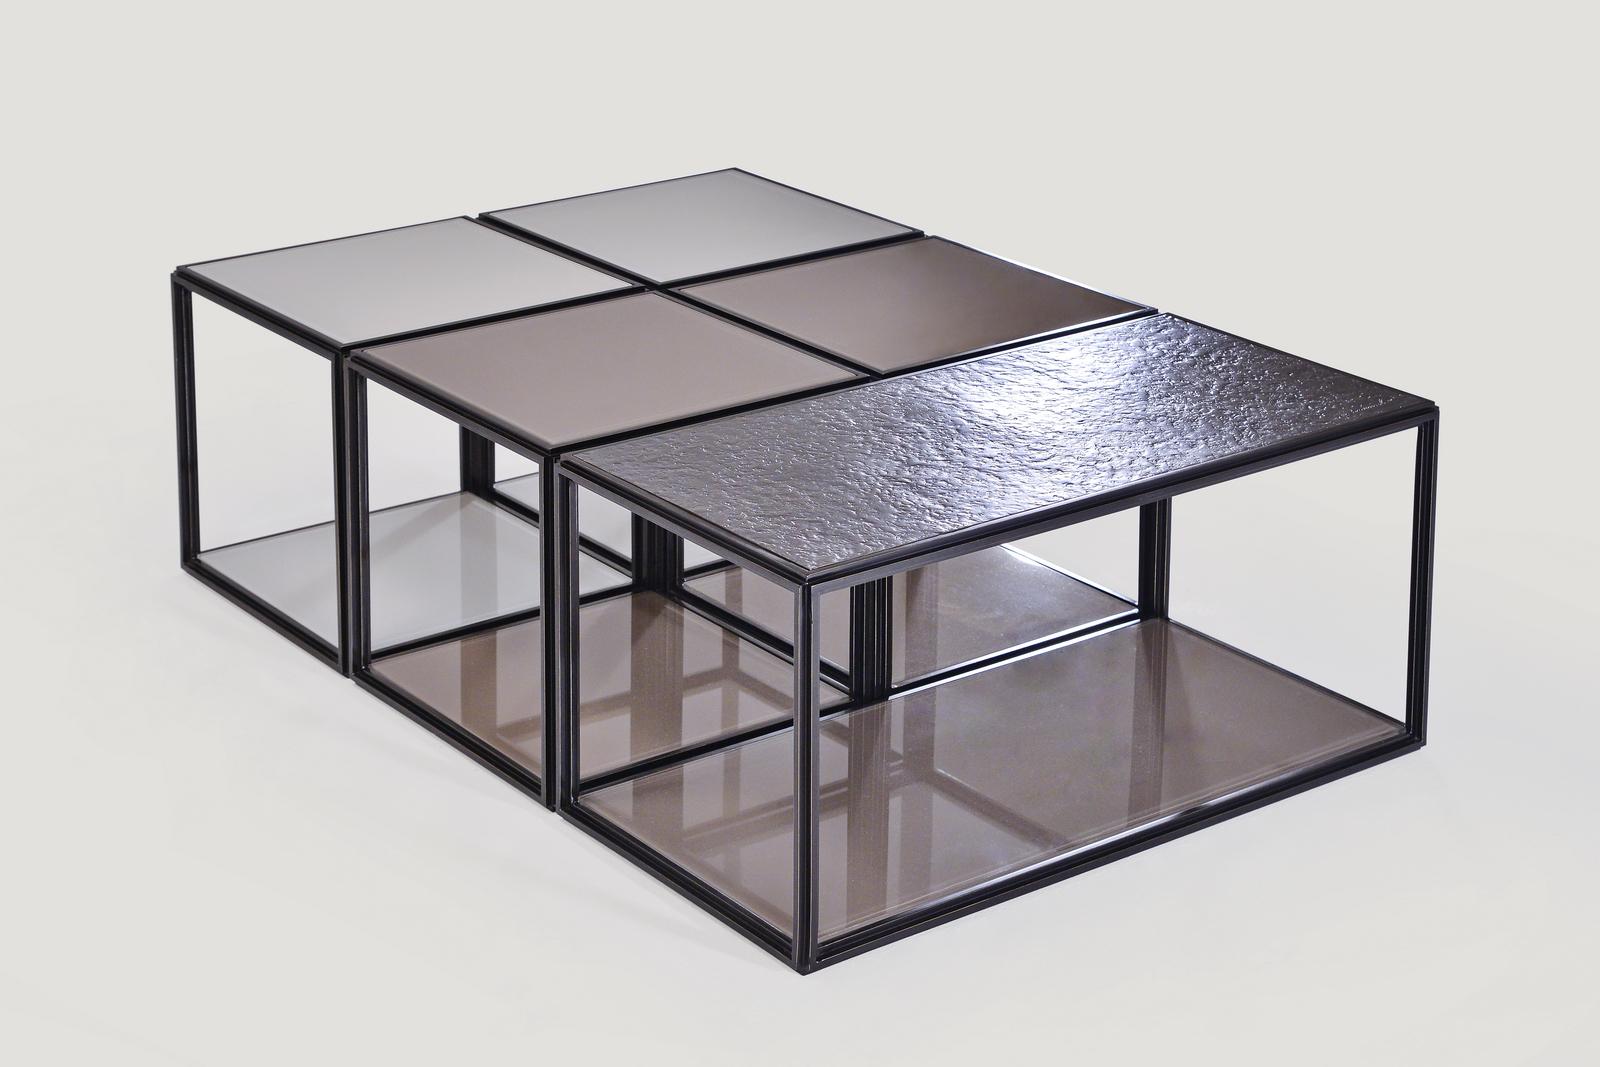 Modular coffee-table, by P.Tendercool

This modular table for a Houston-based interior designer.
He opted for a series of muted colors: blackish-brown lacquered brass frames, a textured bronze top, matched with subtle tones of browns and beige for